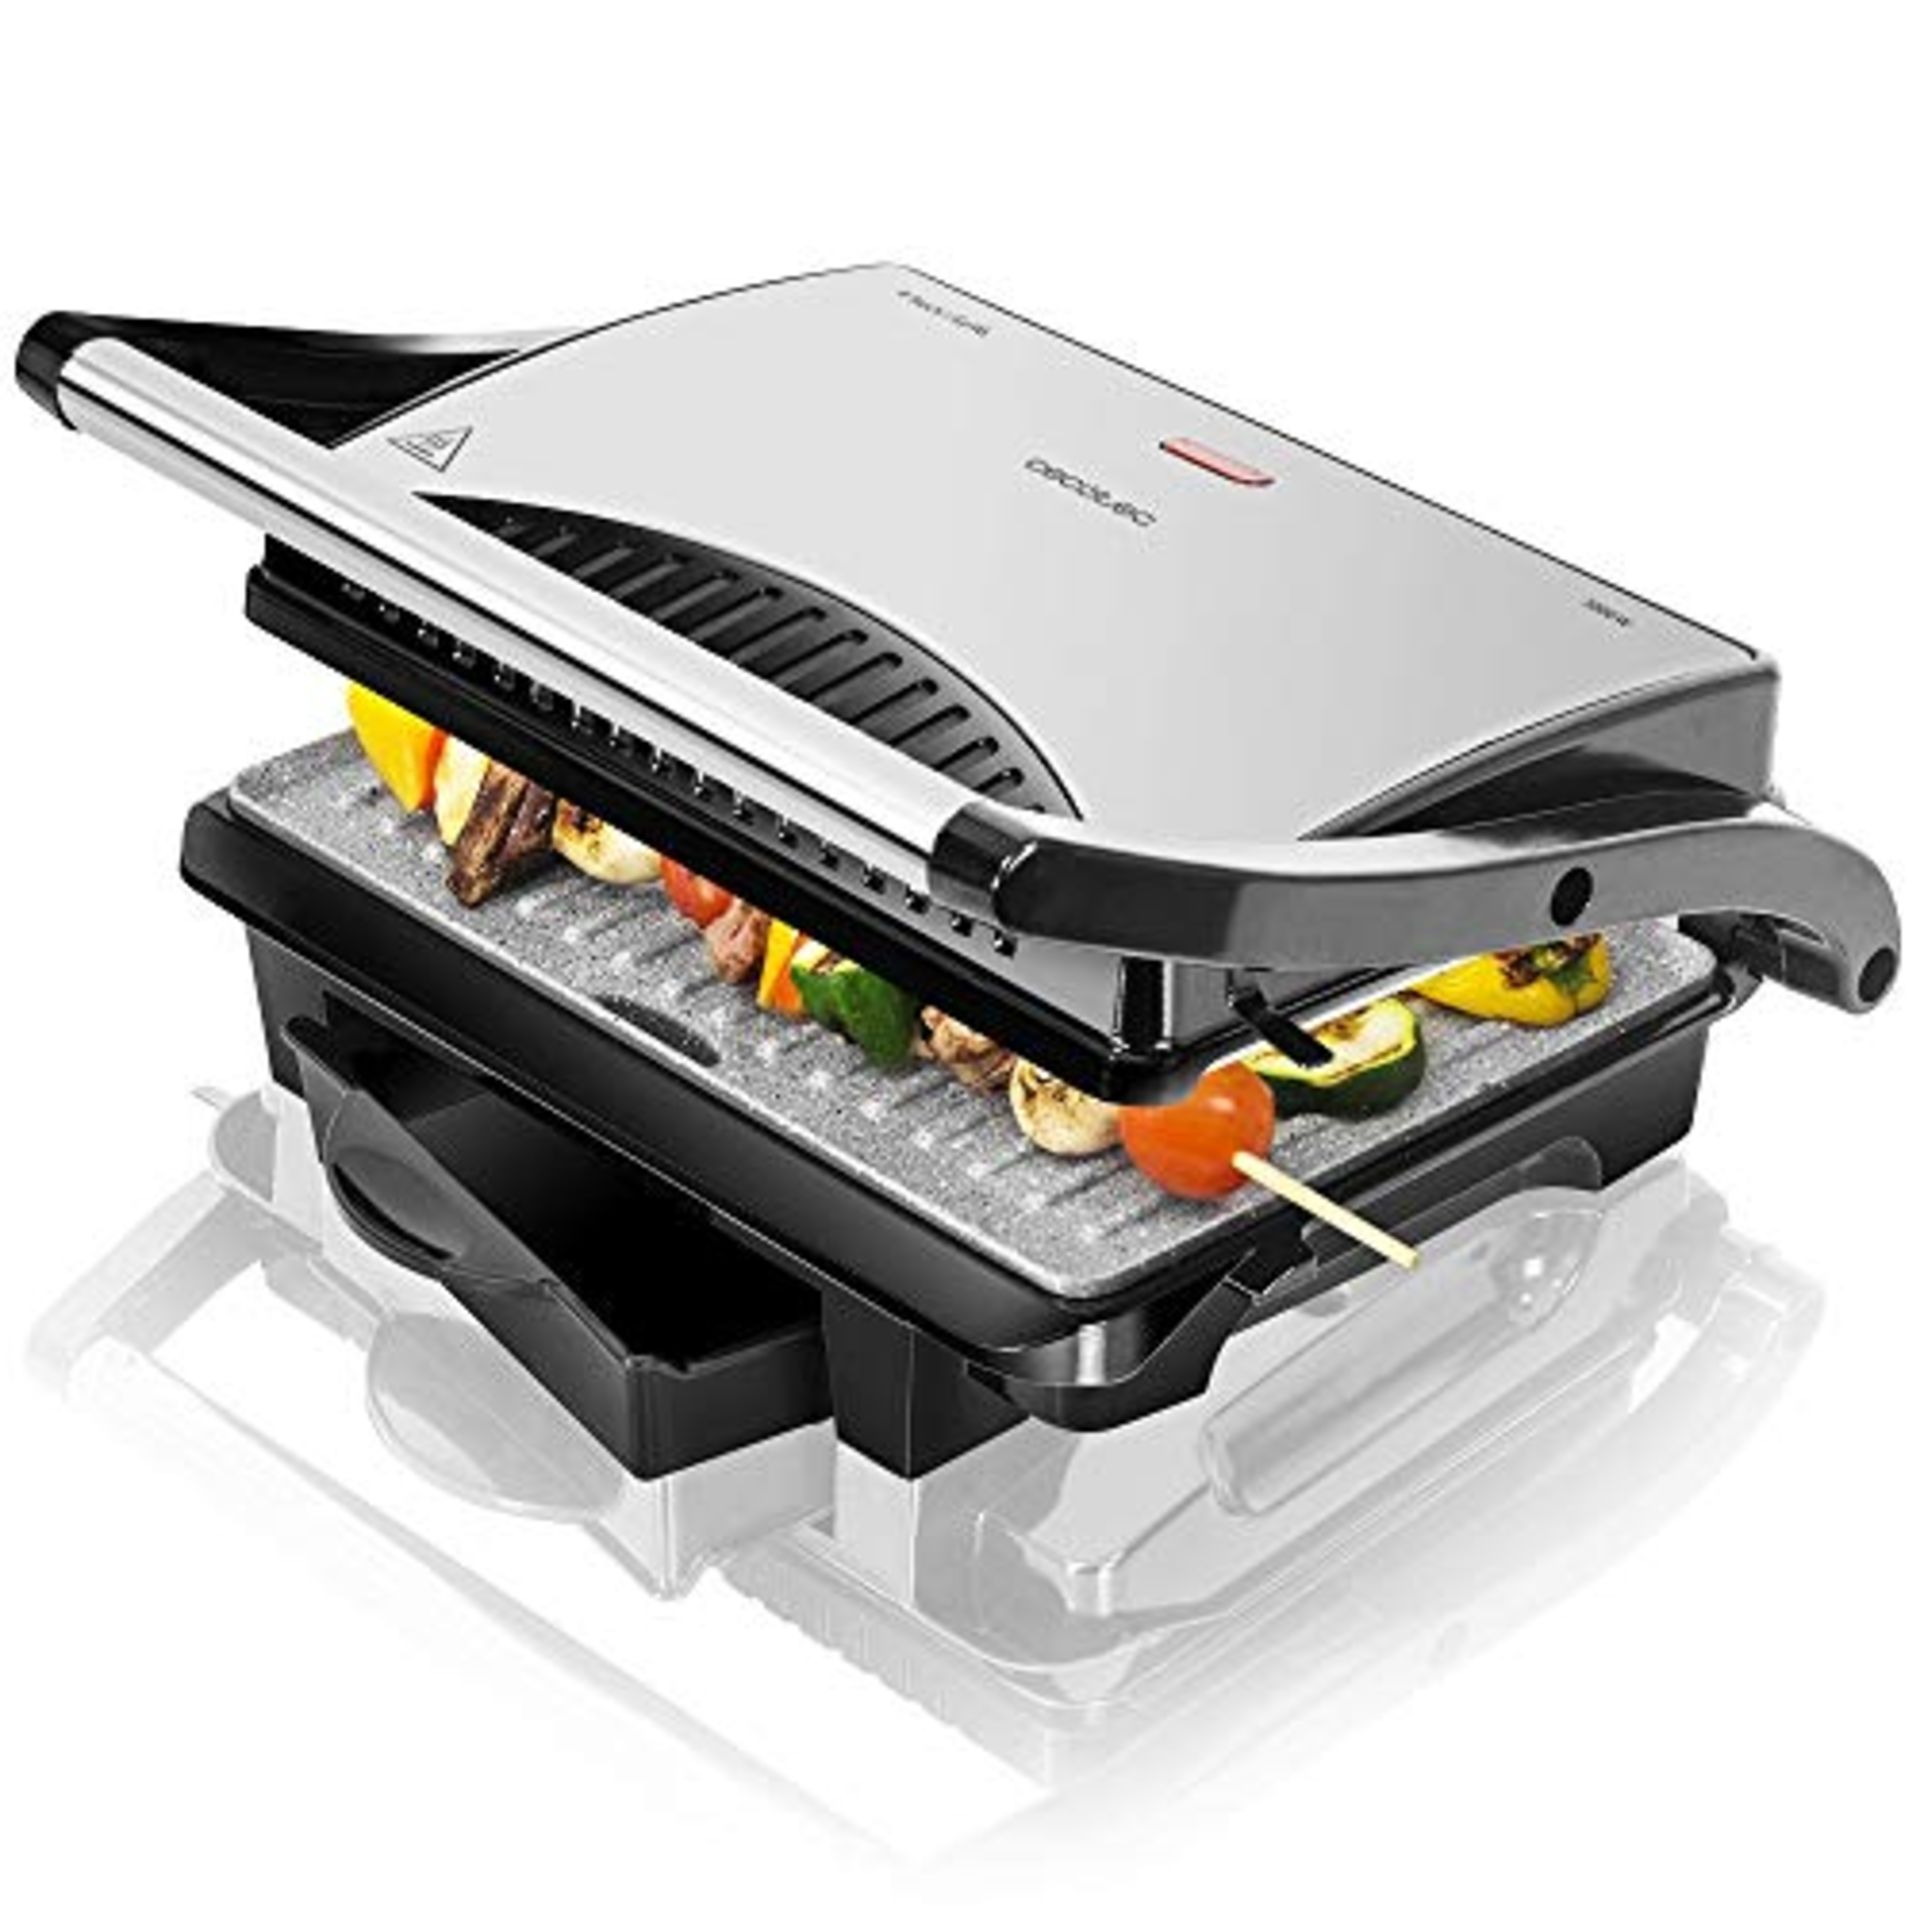 Cecotec Electric Grill Rock'nGrill 1000. 1000 W, Non-stick RockStone coating, Floating